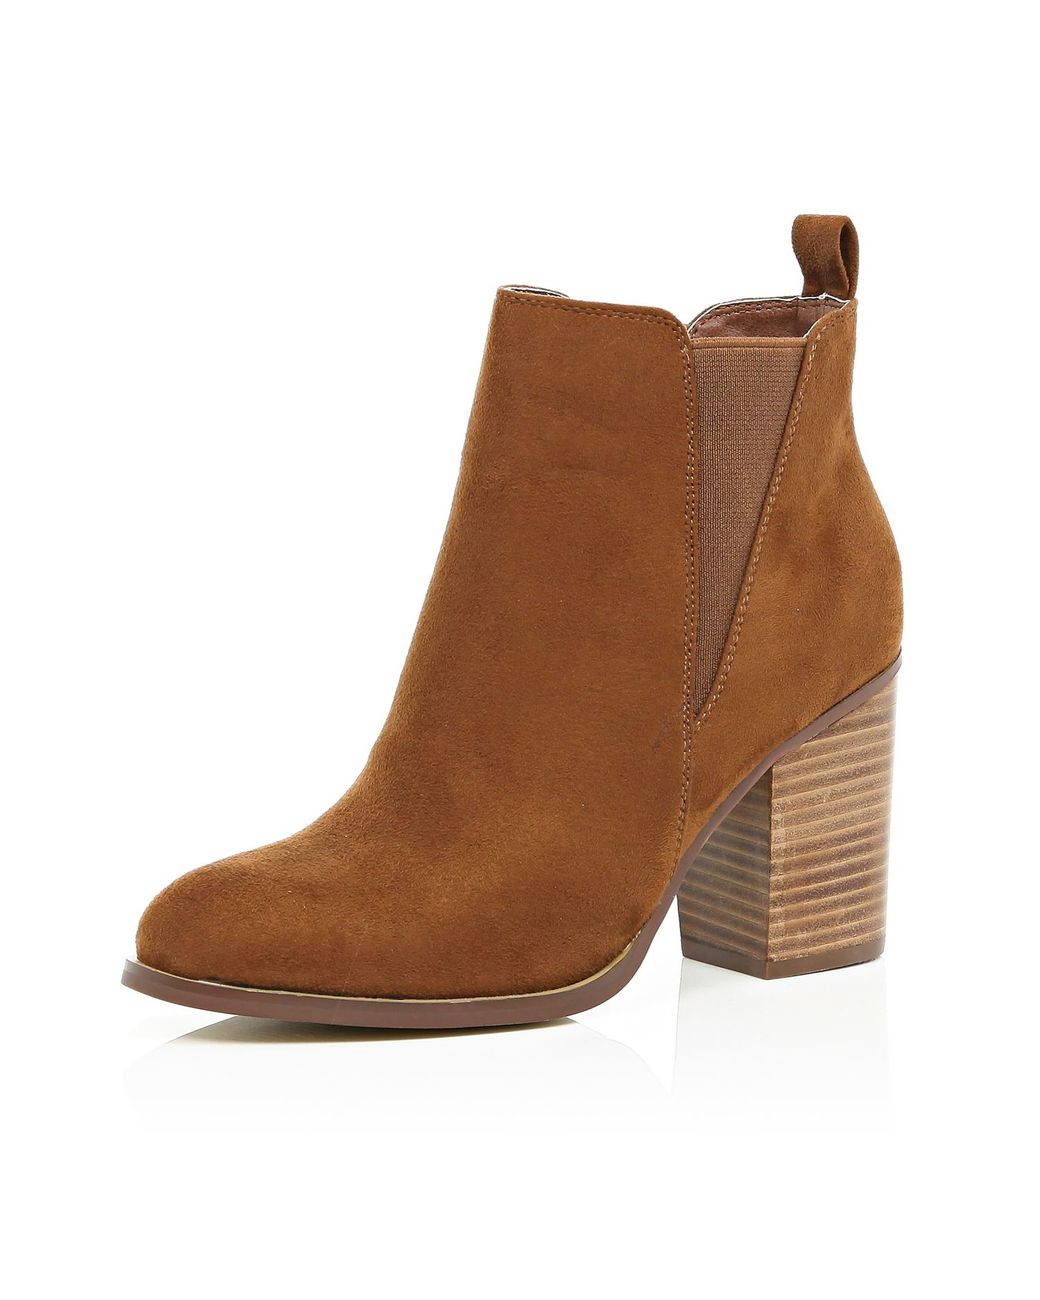 River Island Tan Brown Heeled Chelsea Boots | Lyst